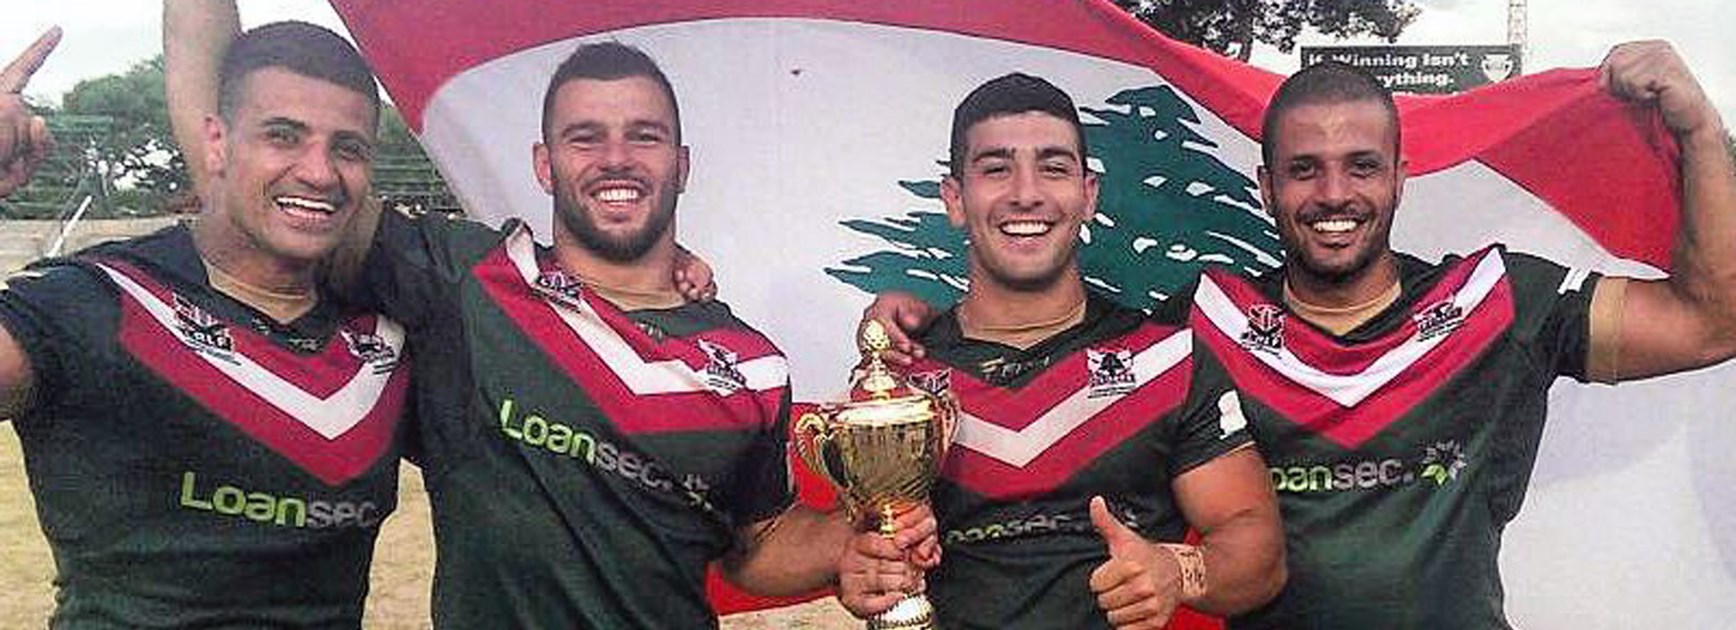 Members of the victorious Lebanon rugby league side who qualified for the 2017 Rugby League World Cup, with James Elias second from left.